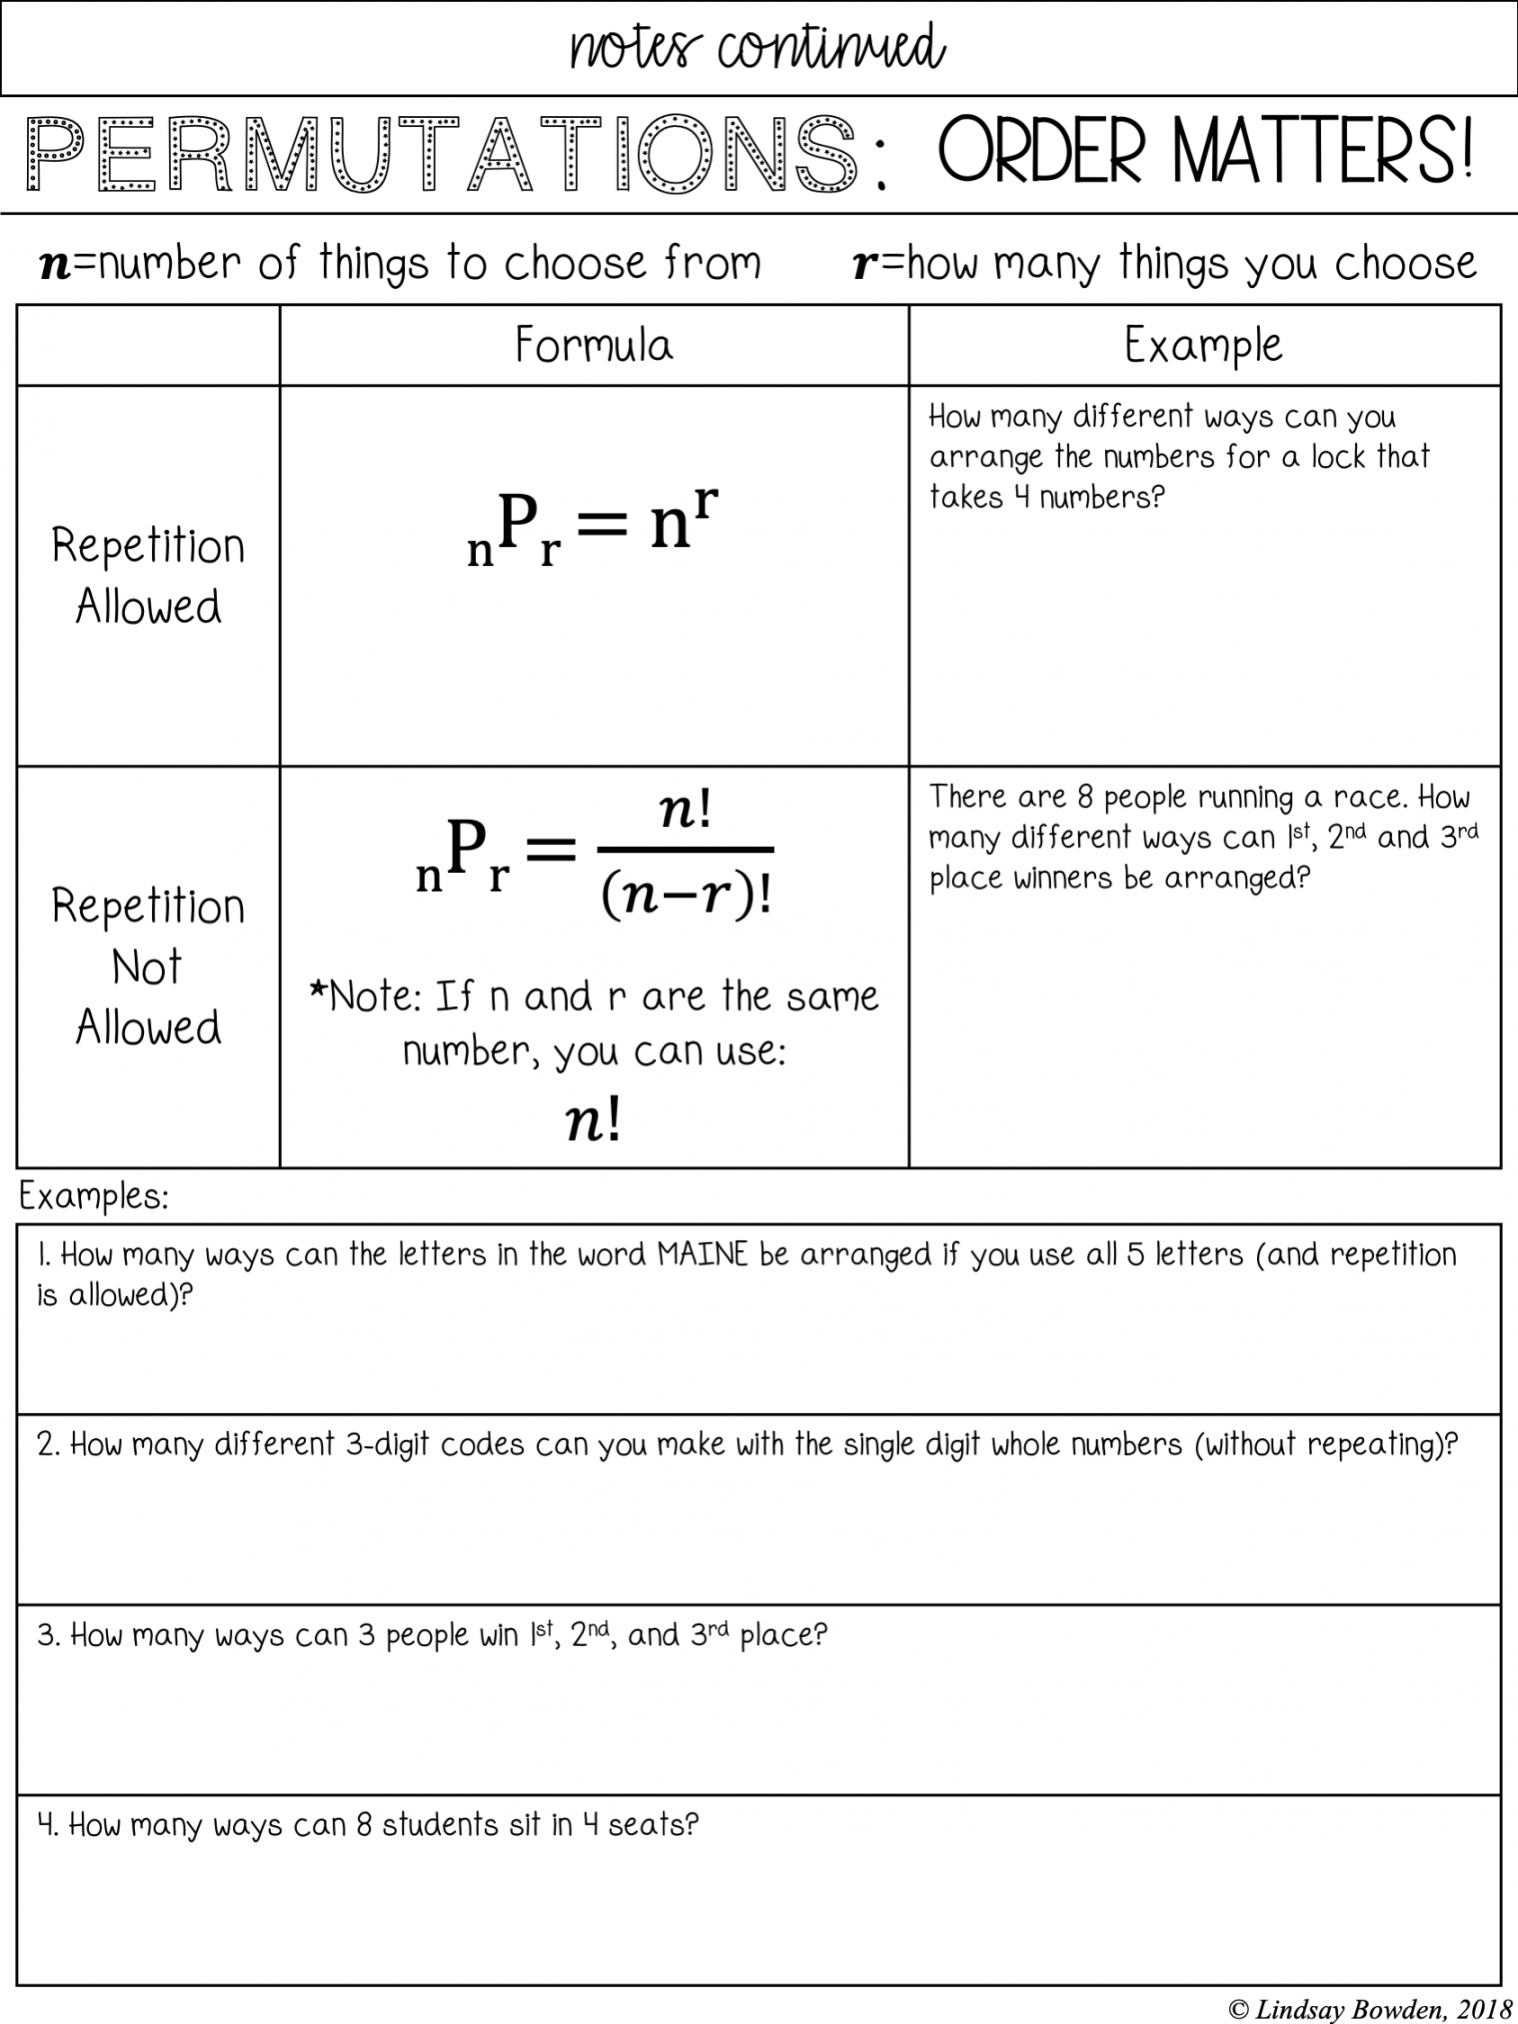 Permutations and Combinations Notes and Worksheets - Lindsay Bowden